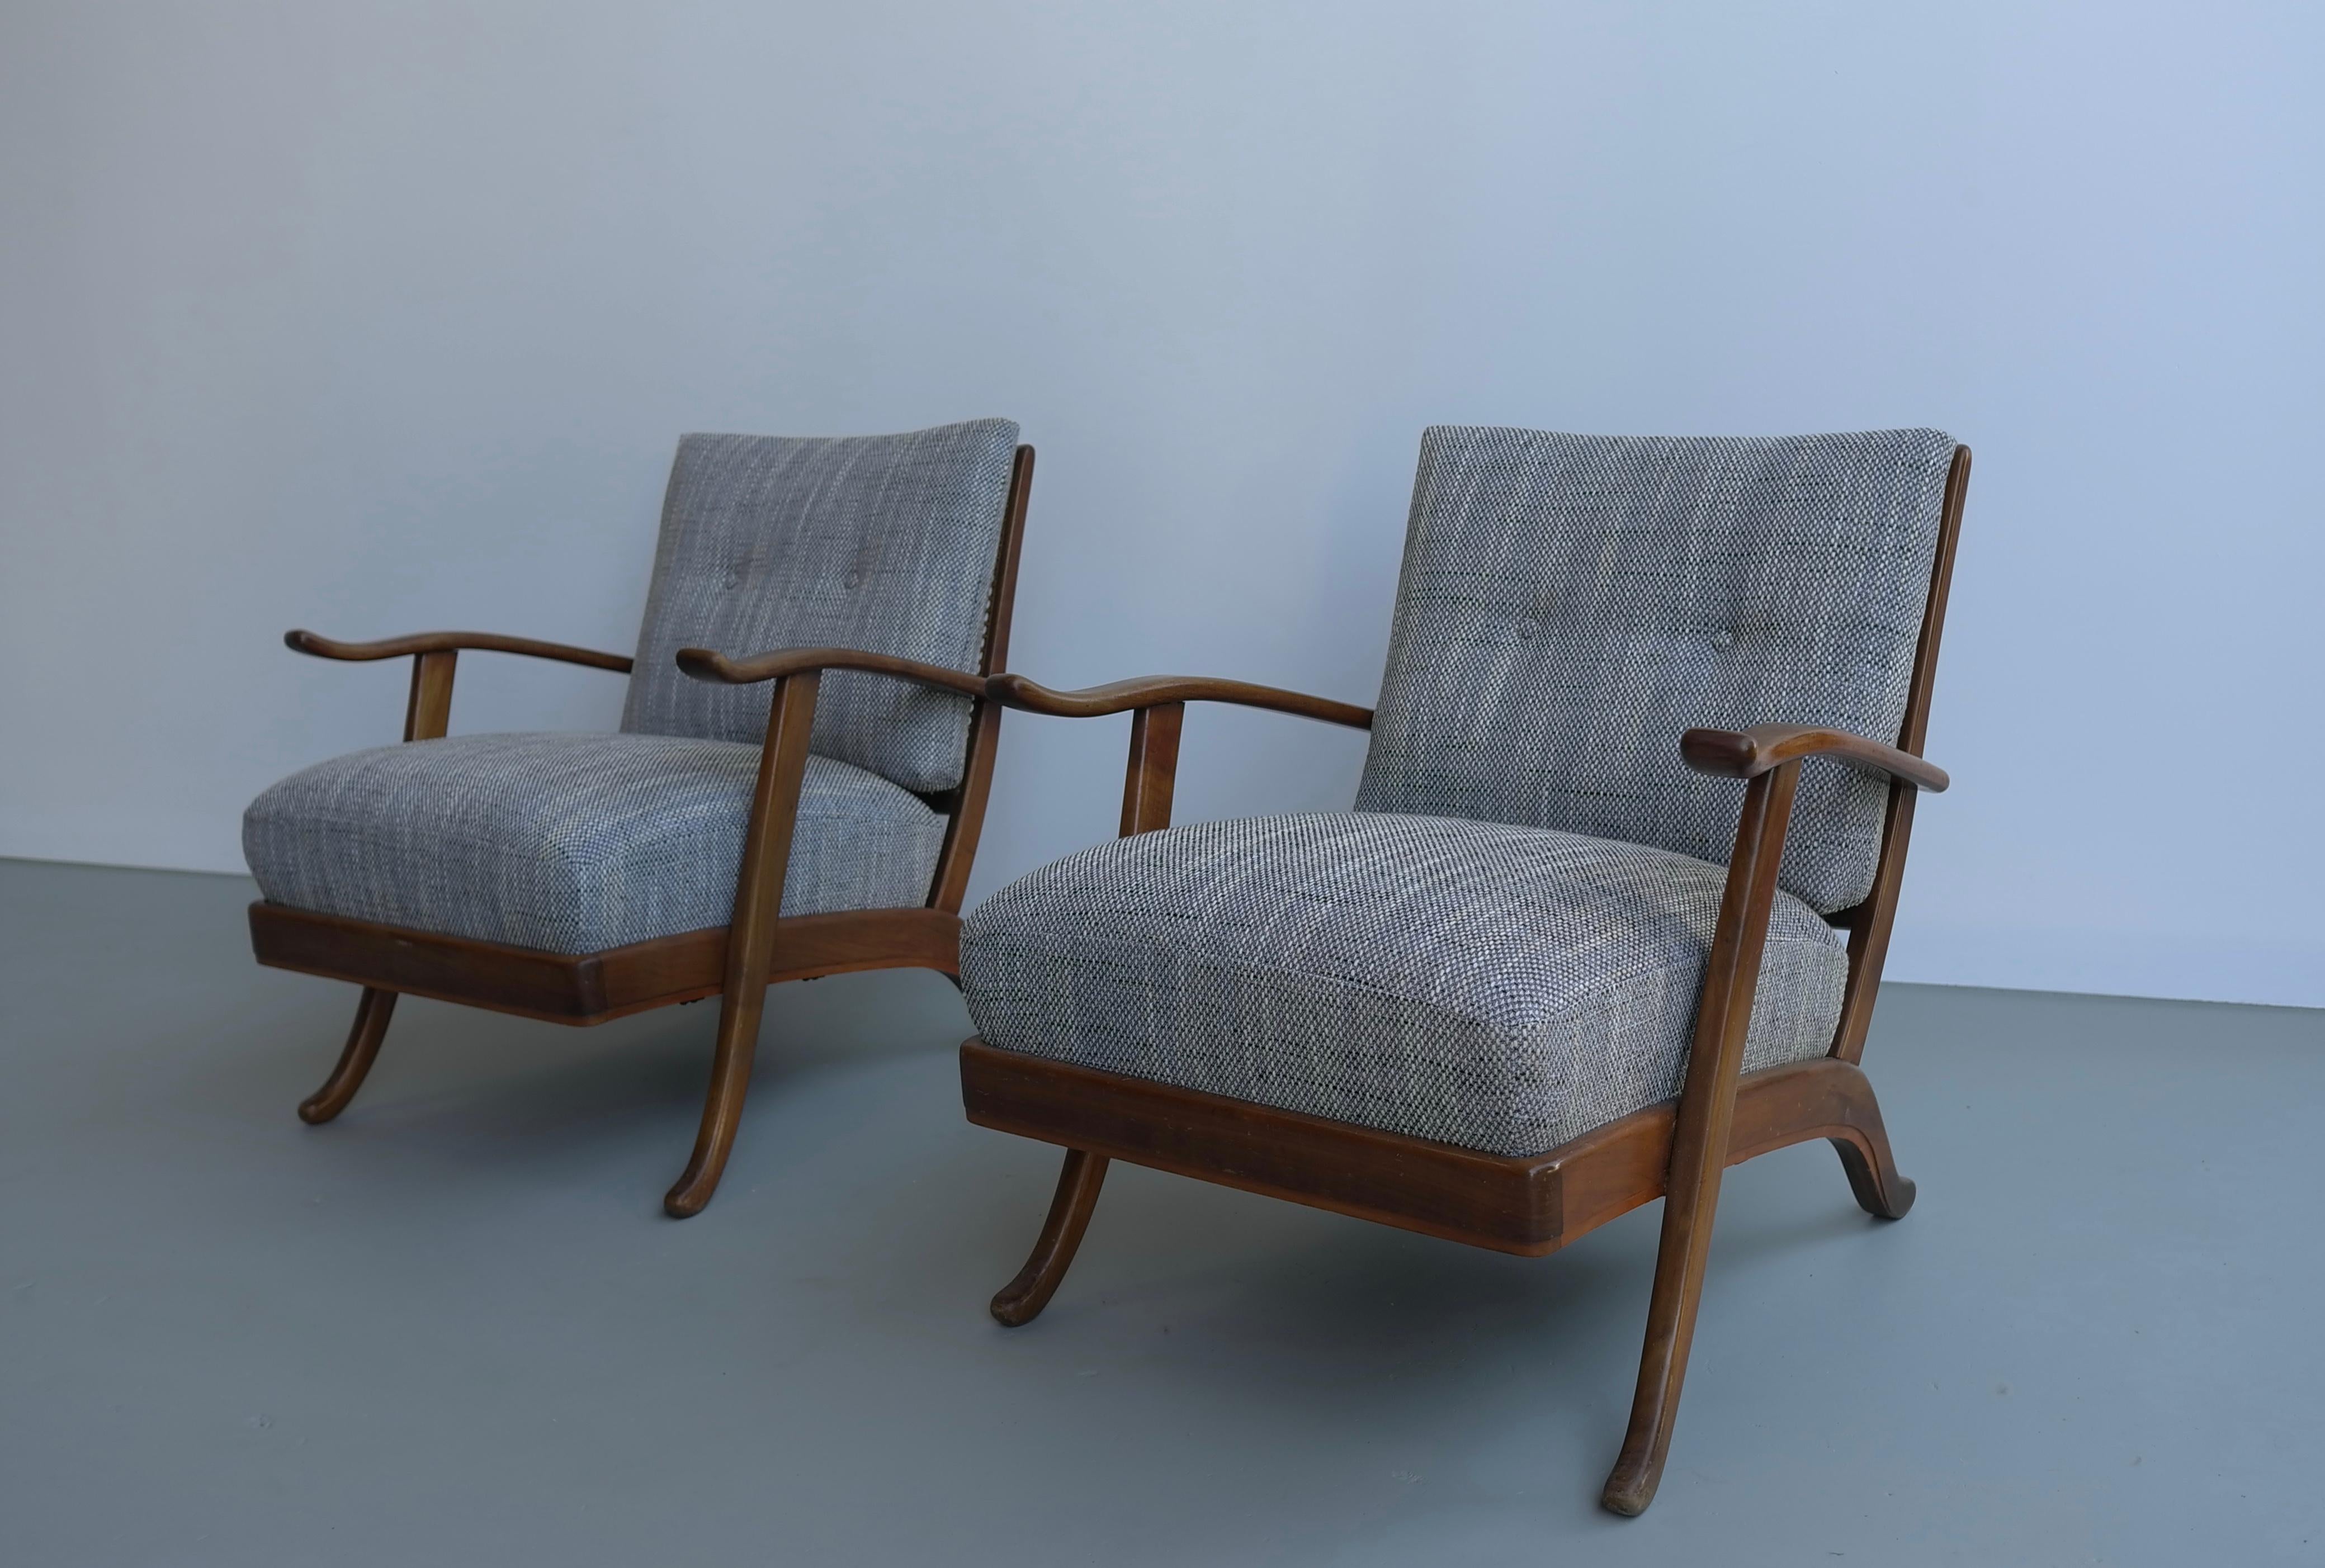 Pair of organic lounge chair in wood and wicker, Italy, 1950s. Newly upholstered in white and grey thread fabric.